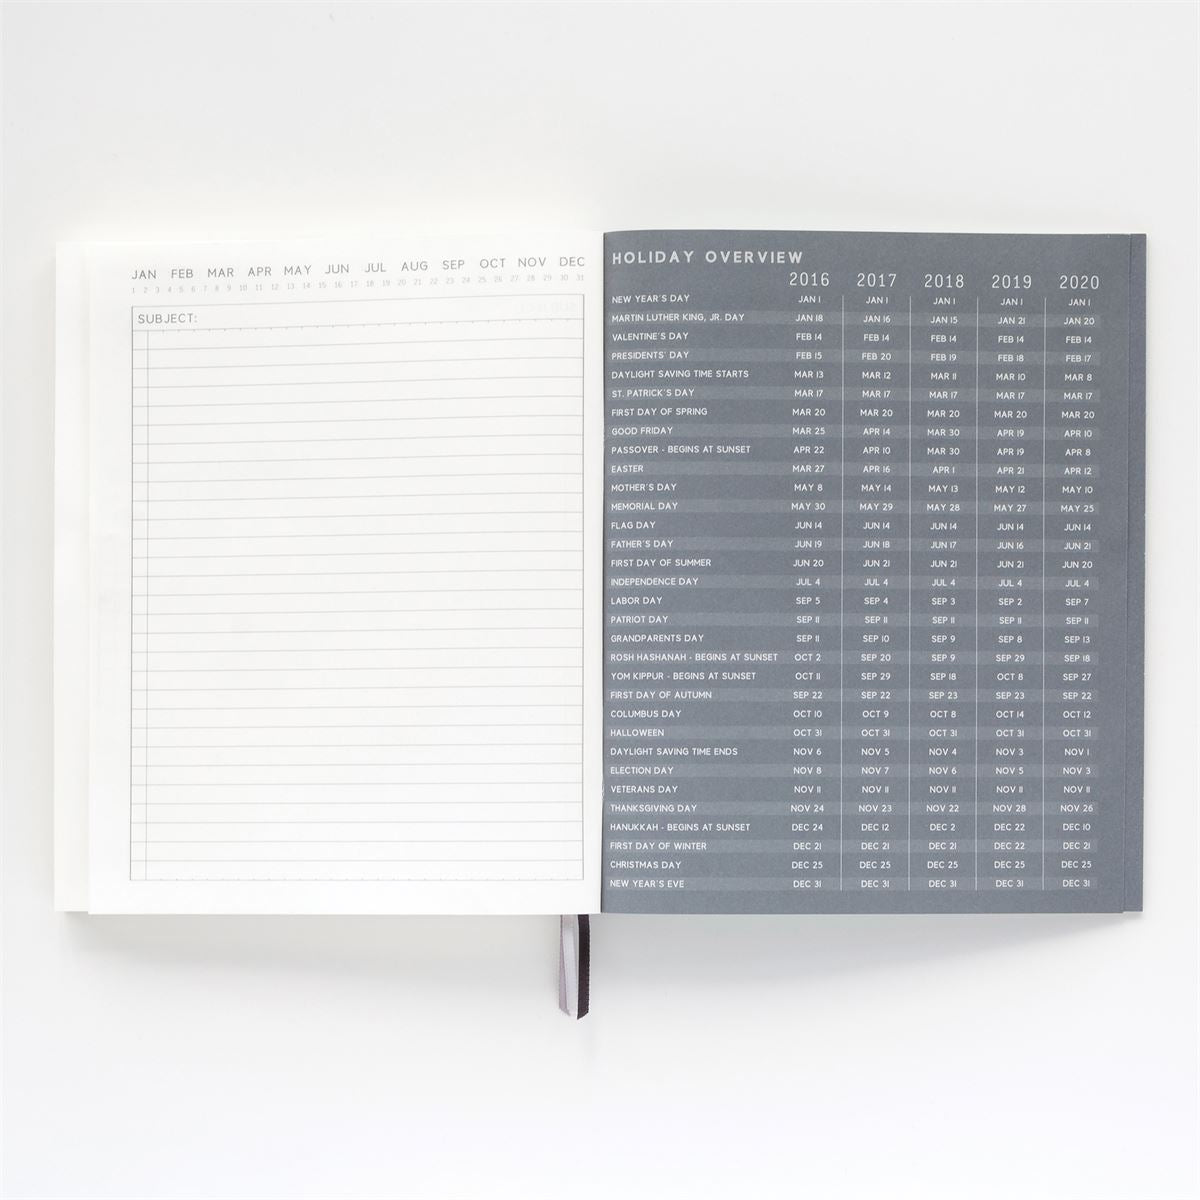 Undated Planner | Standard Issue Collection